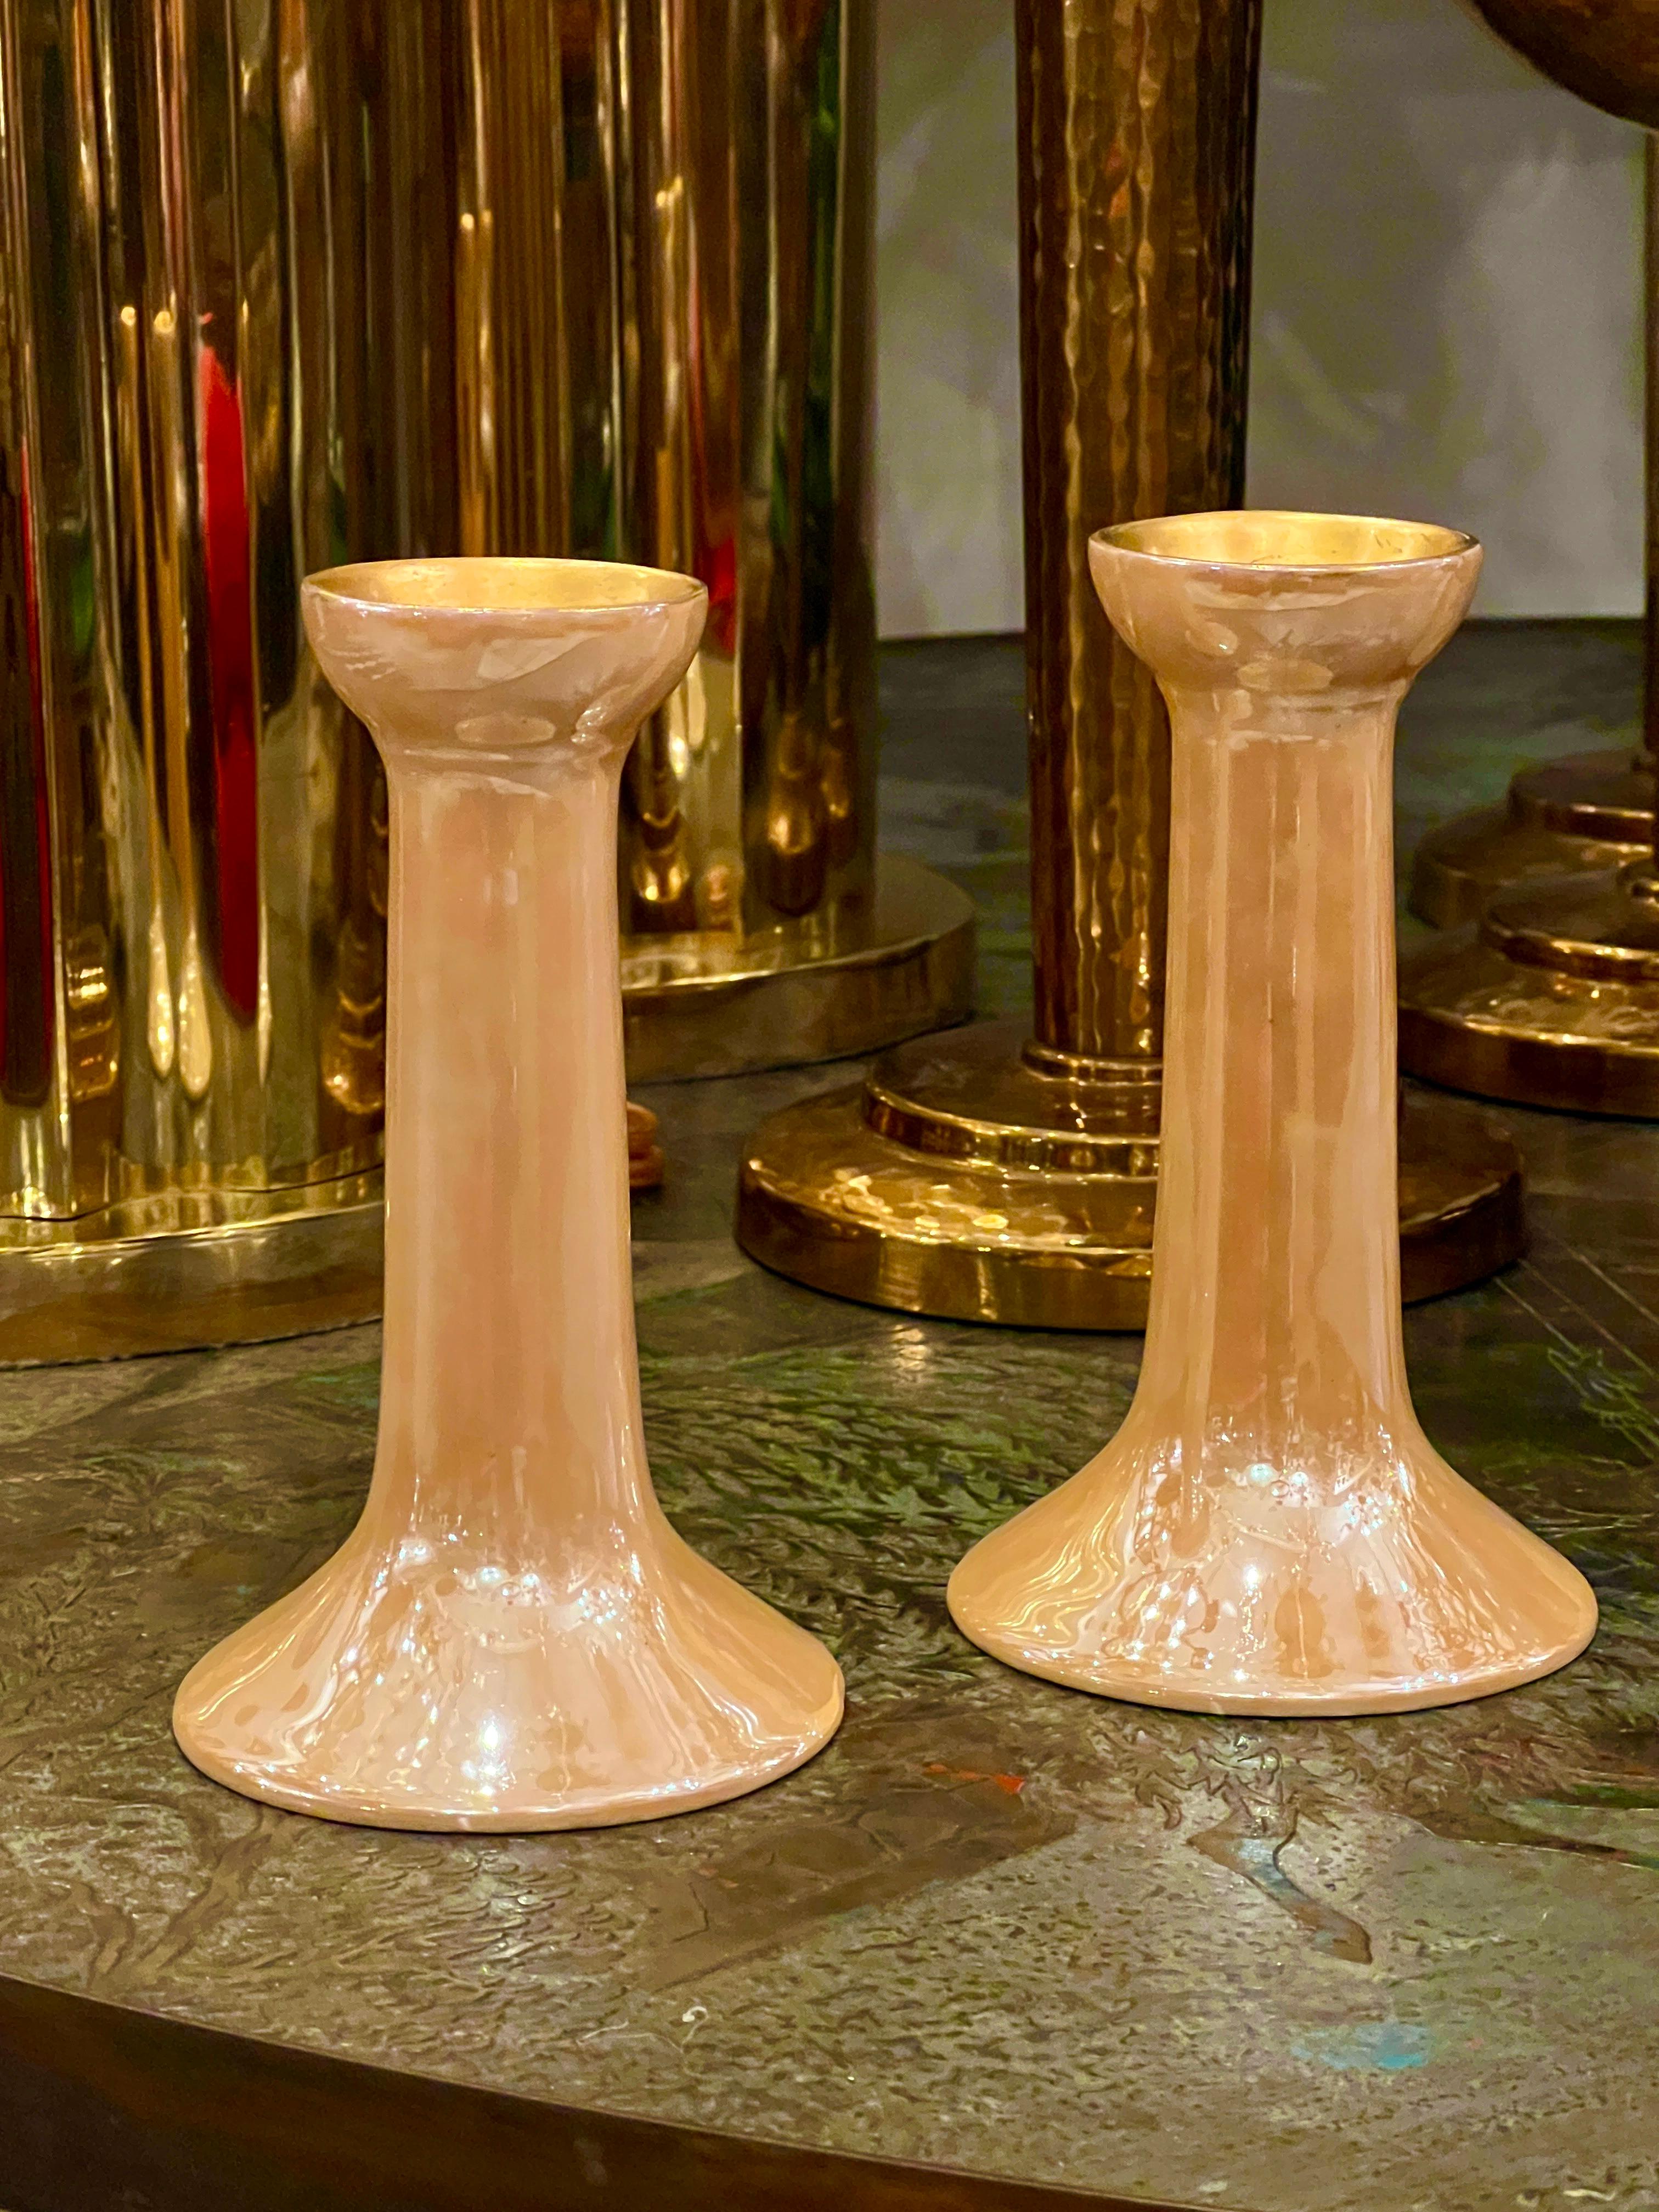 A pair of Art Deco circa 192o'a French luster-glazed porcelain candlesticks.

Measurements:
Height of body: 6.5